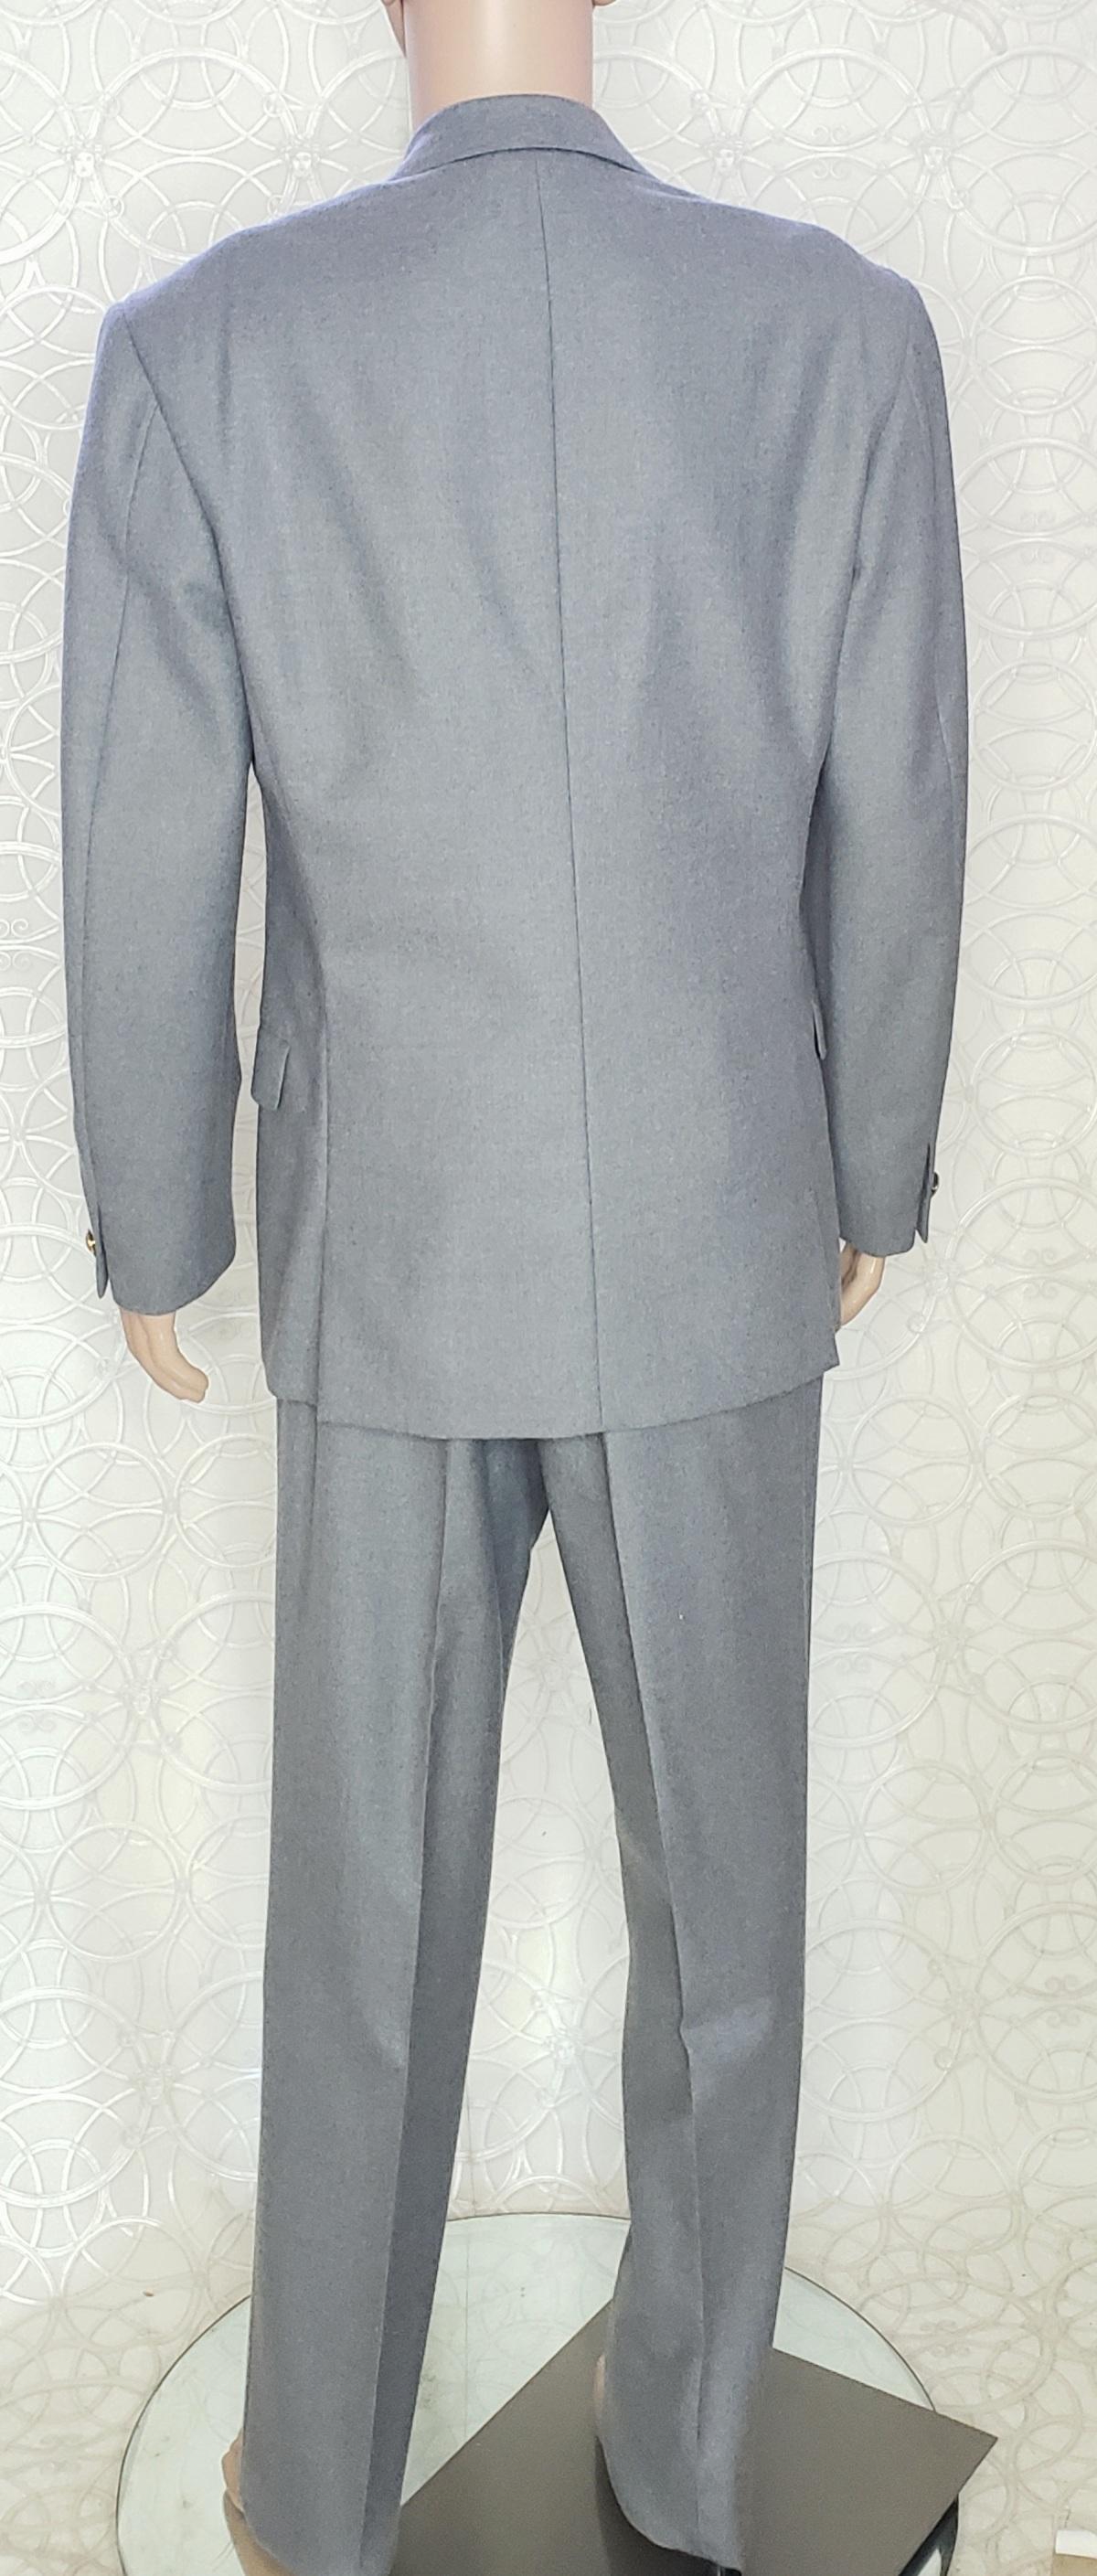 VERSACE F/W 2013 look # 45 BRAND NEW GRAY WOOL SUIT 48 - 38 (M) For Sale 2